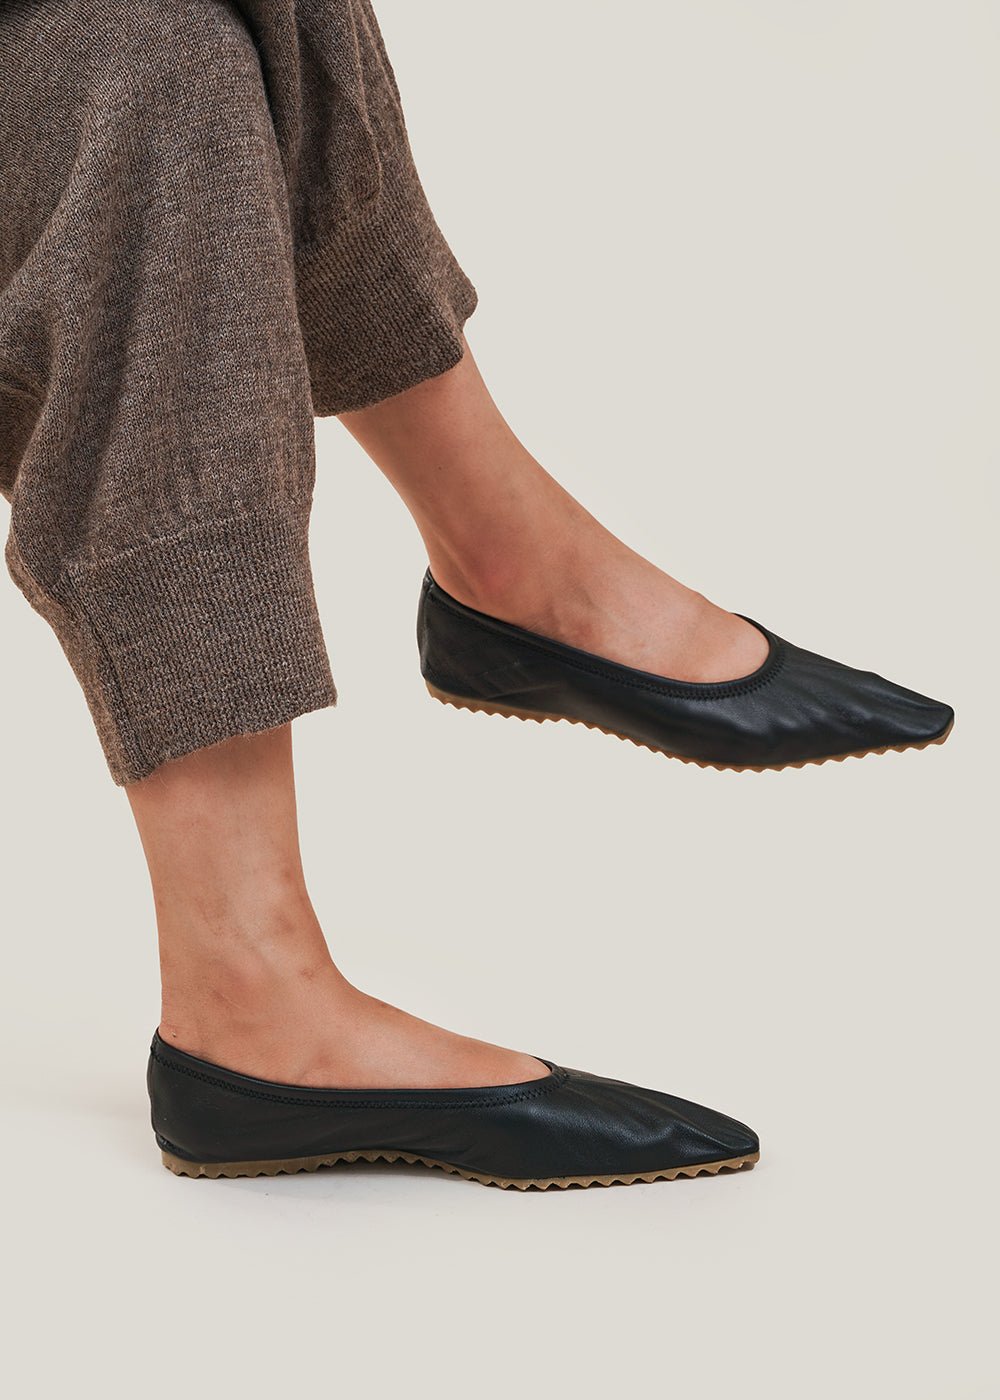 Modern Weaving Black Ballet Flat - New Classics Studios Sustainable Ethical Fashion Canada